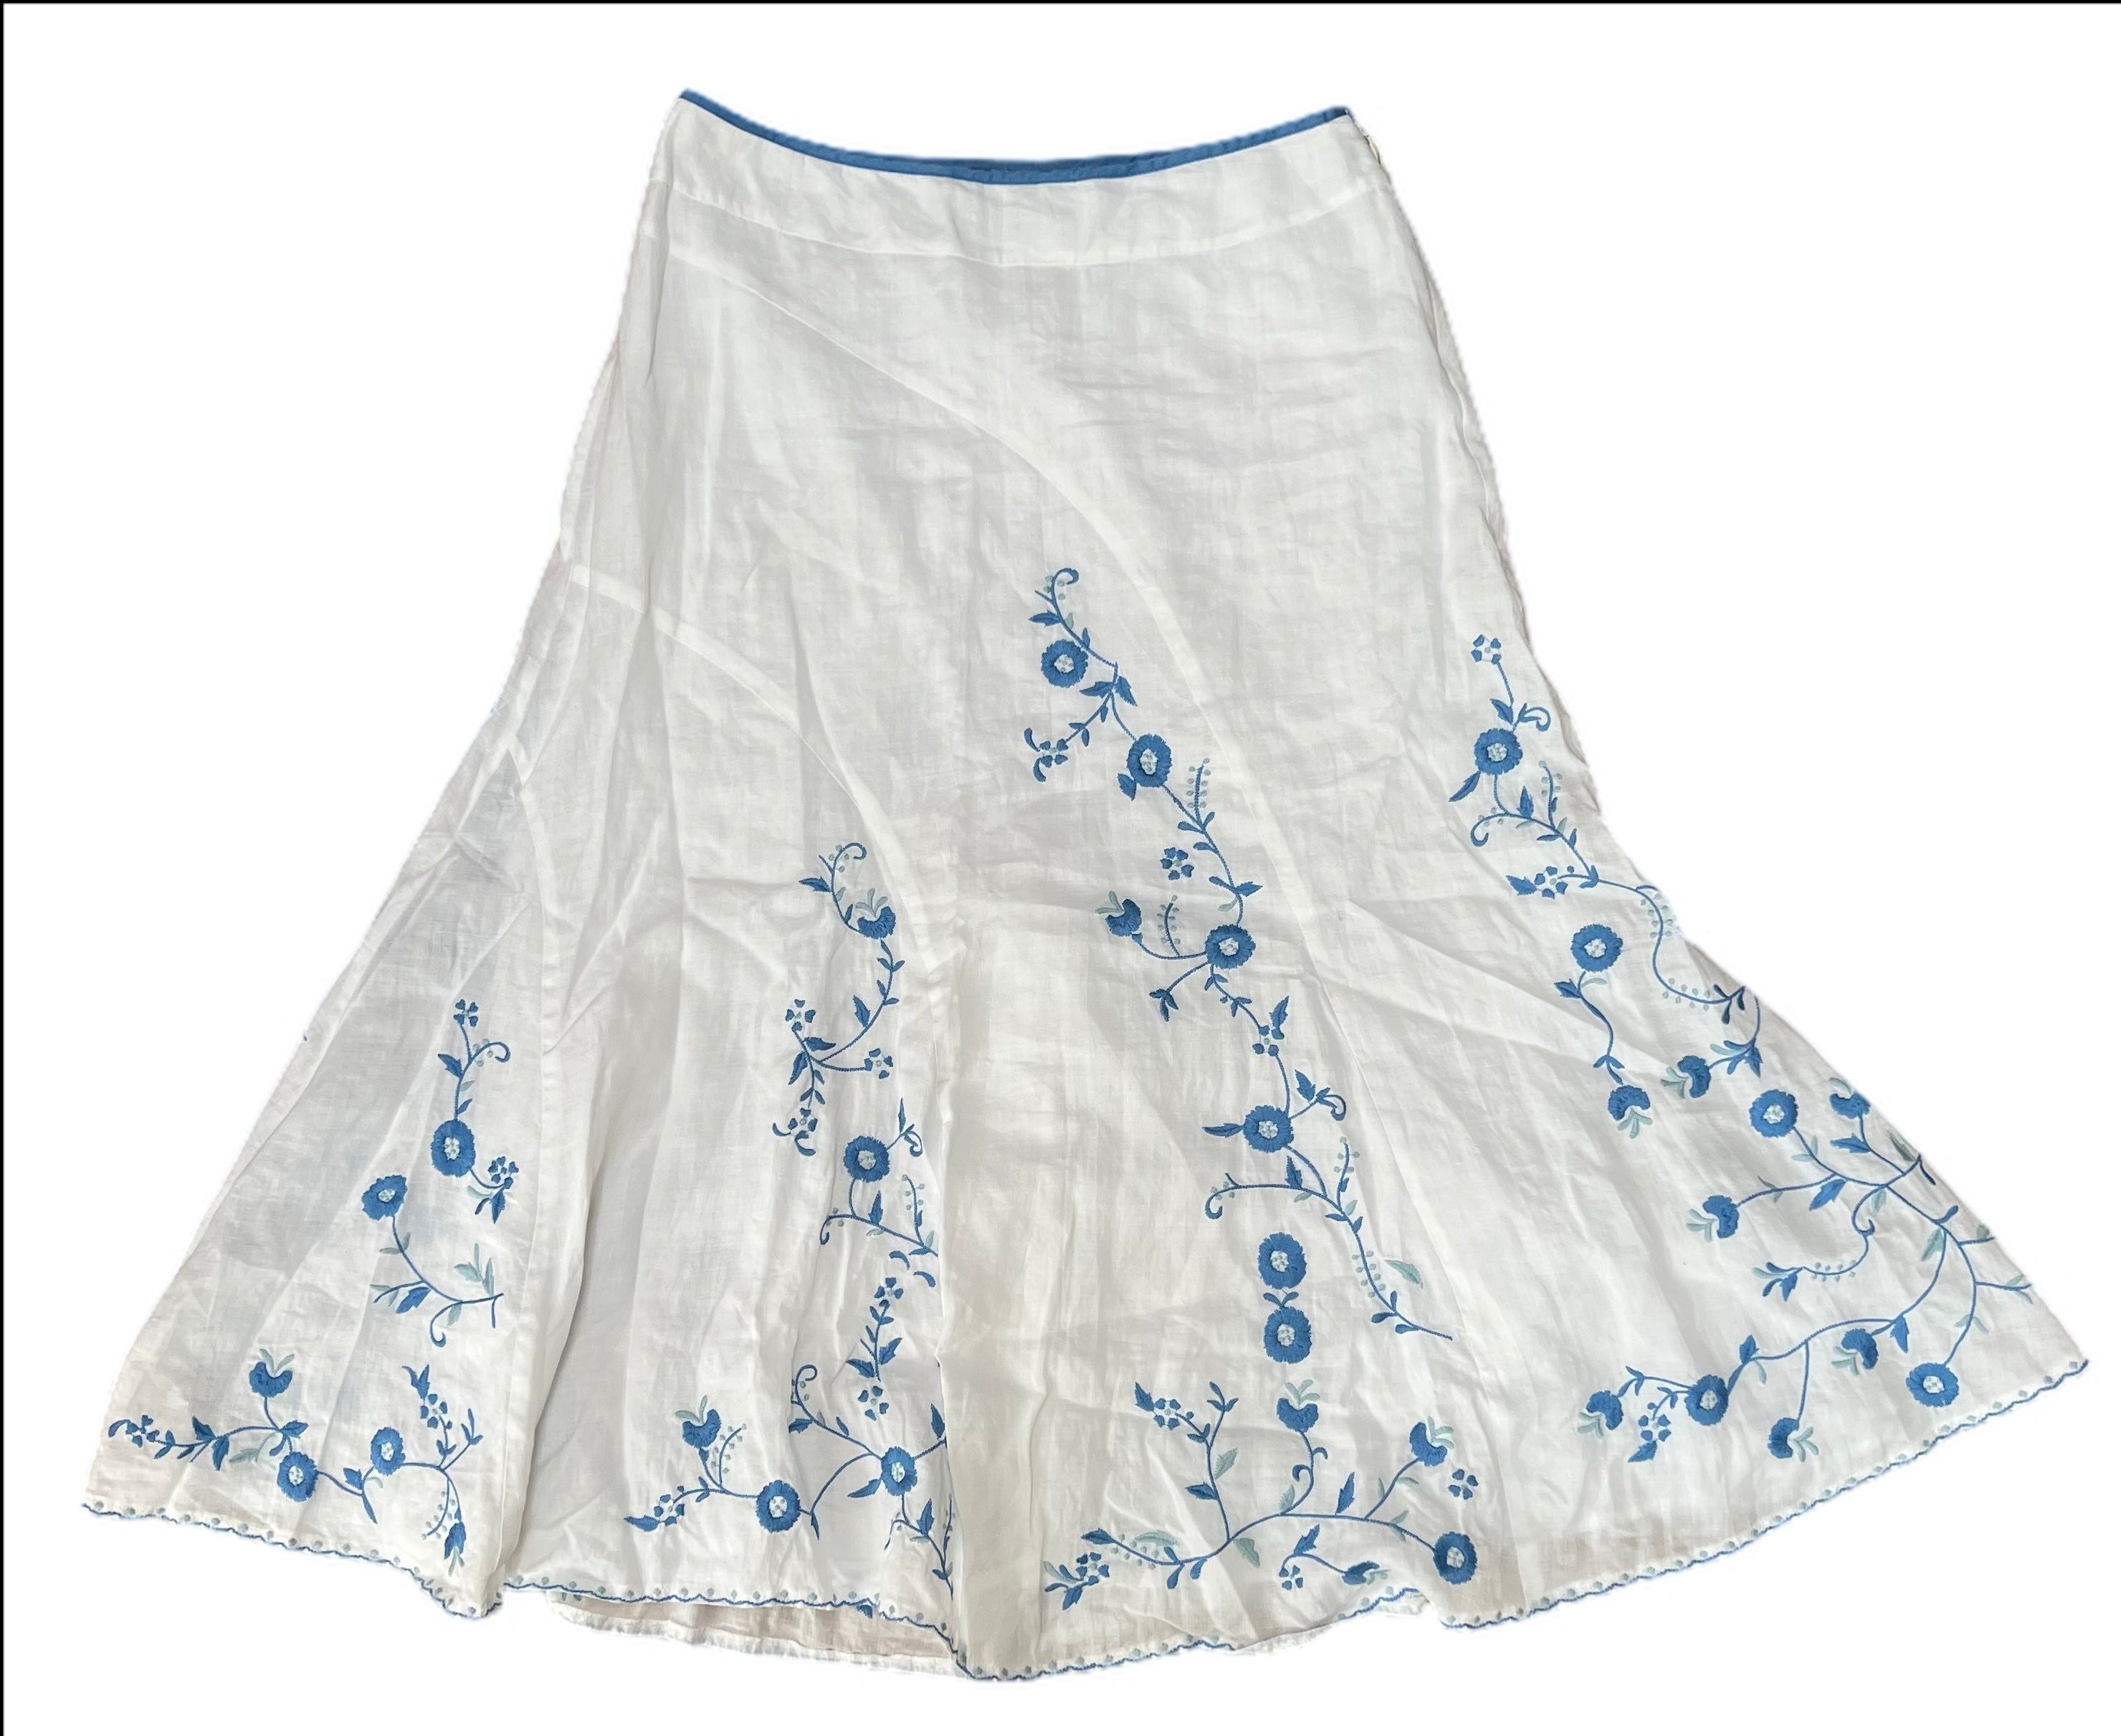 Long skirt with embroidered flowers